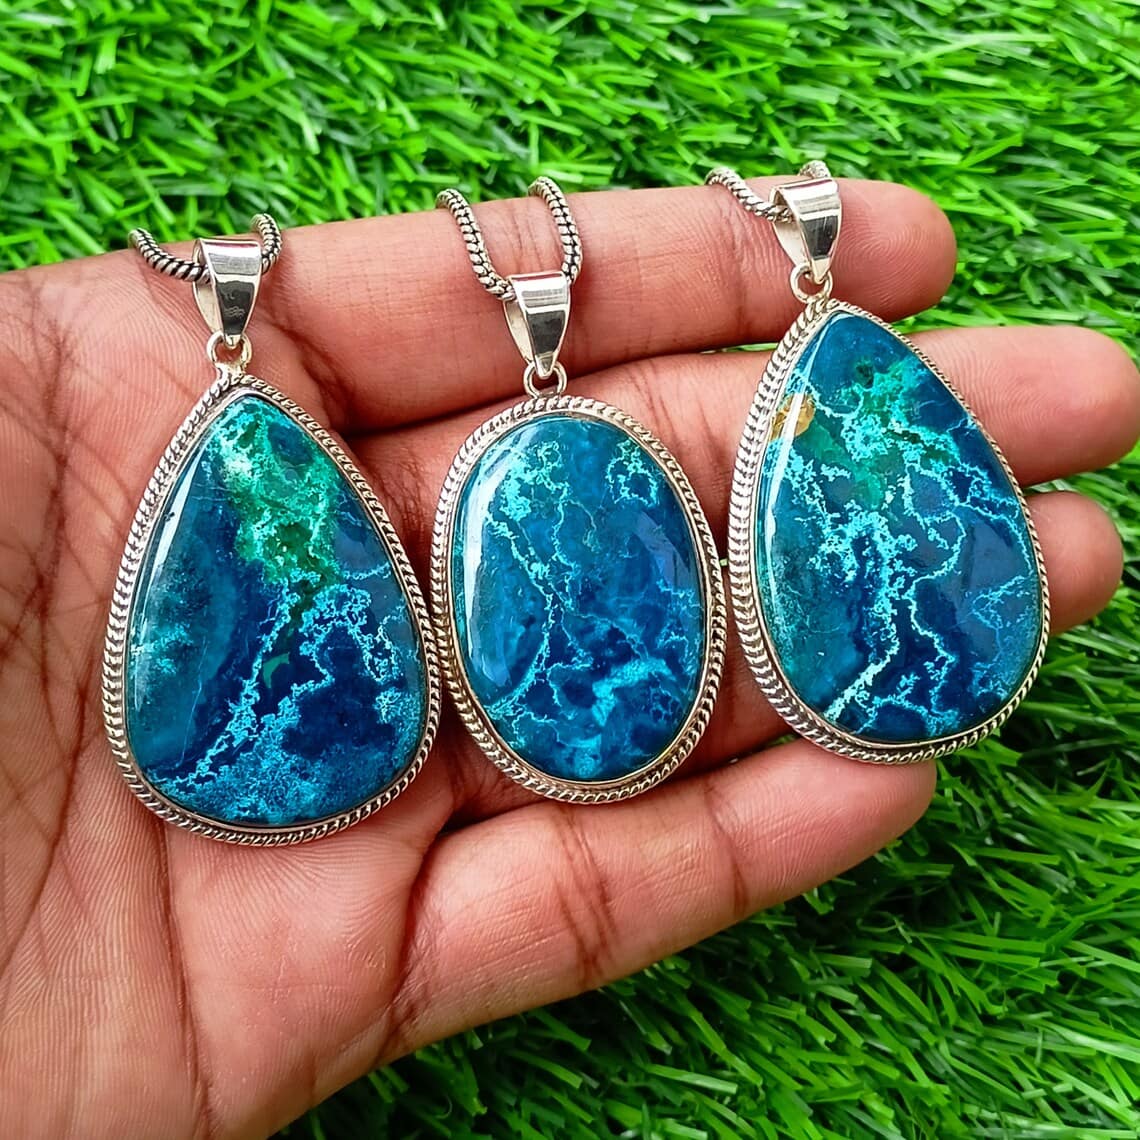 a hand holding azurite pendant necklaces